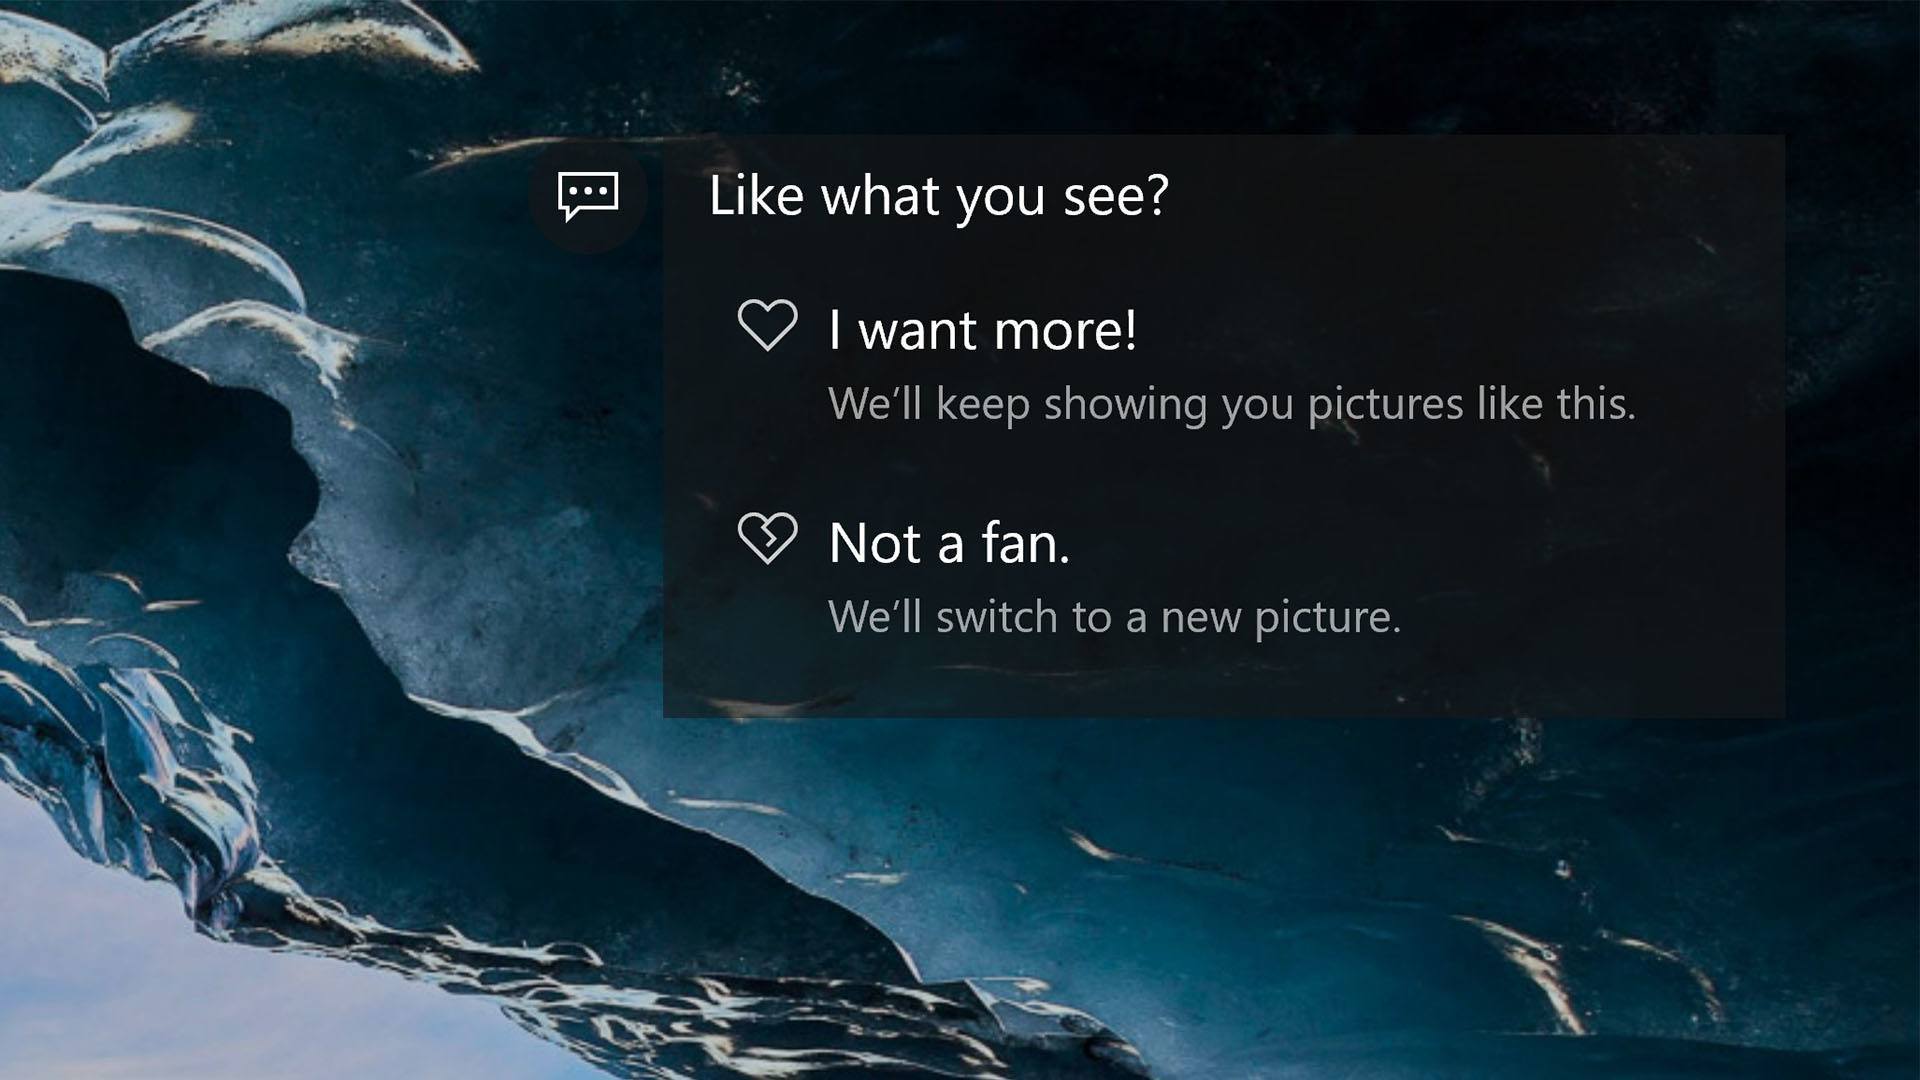 How to Find Windows Spotlight Lock Screen Images in Windows 10